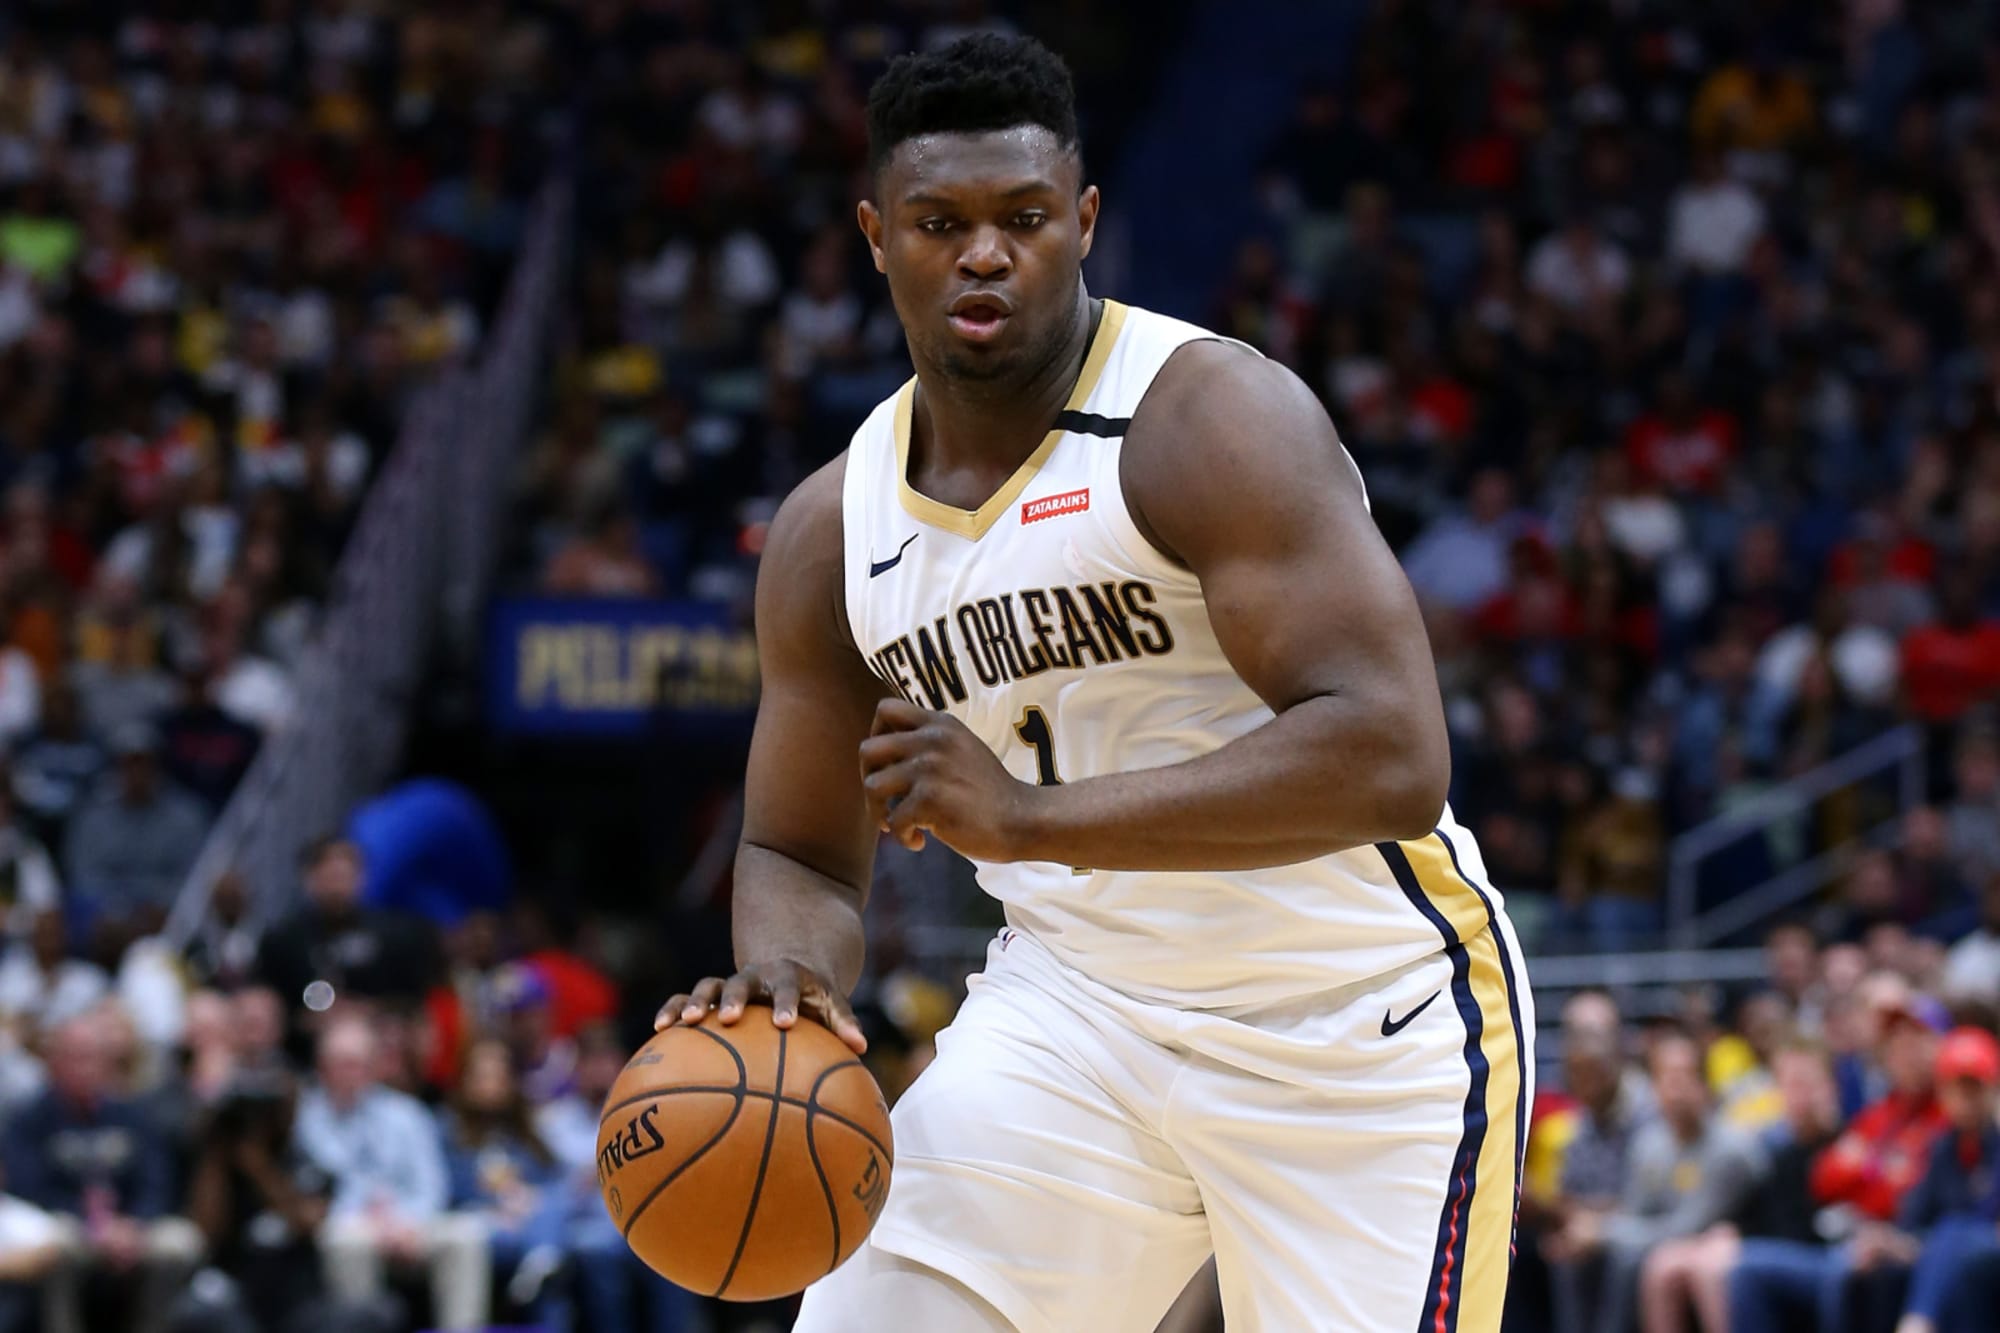 Duke basketball Zion Williamson continues to make history in rookie year